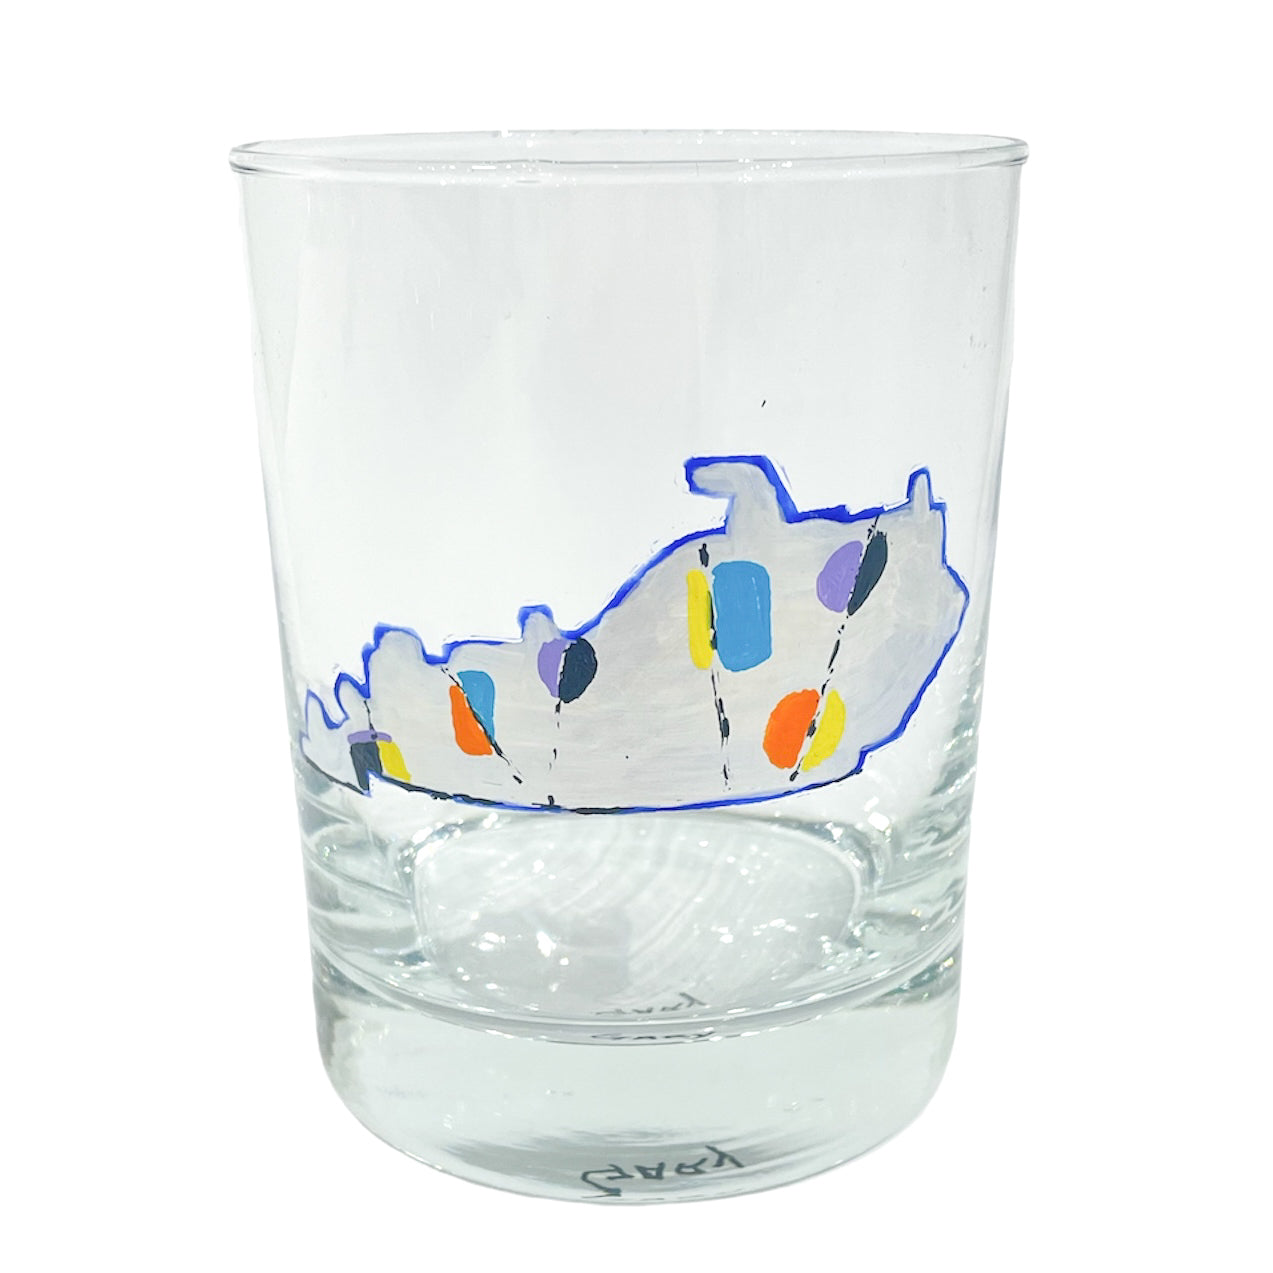 DOUBLE OLD FASHIONED KENTUCKY GLASS